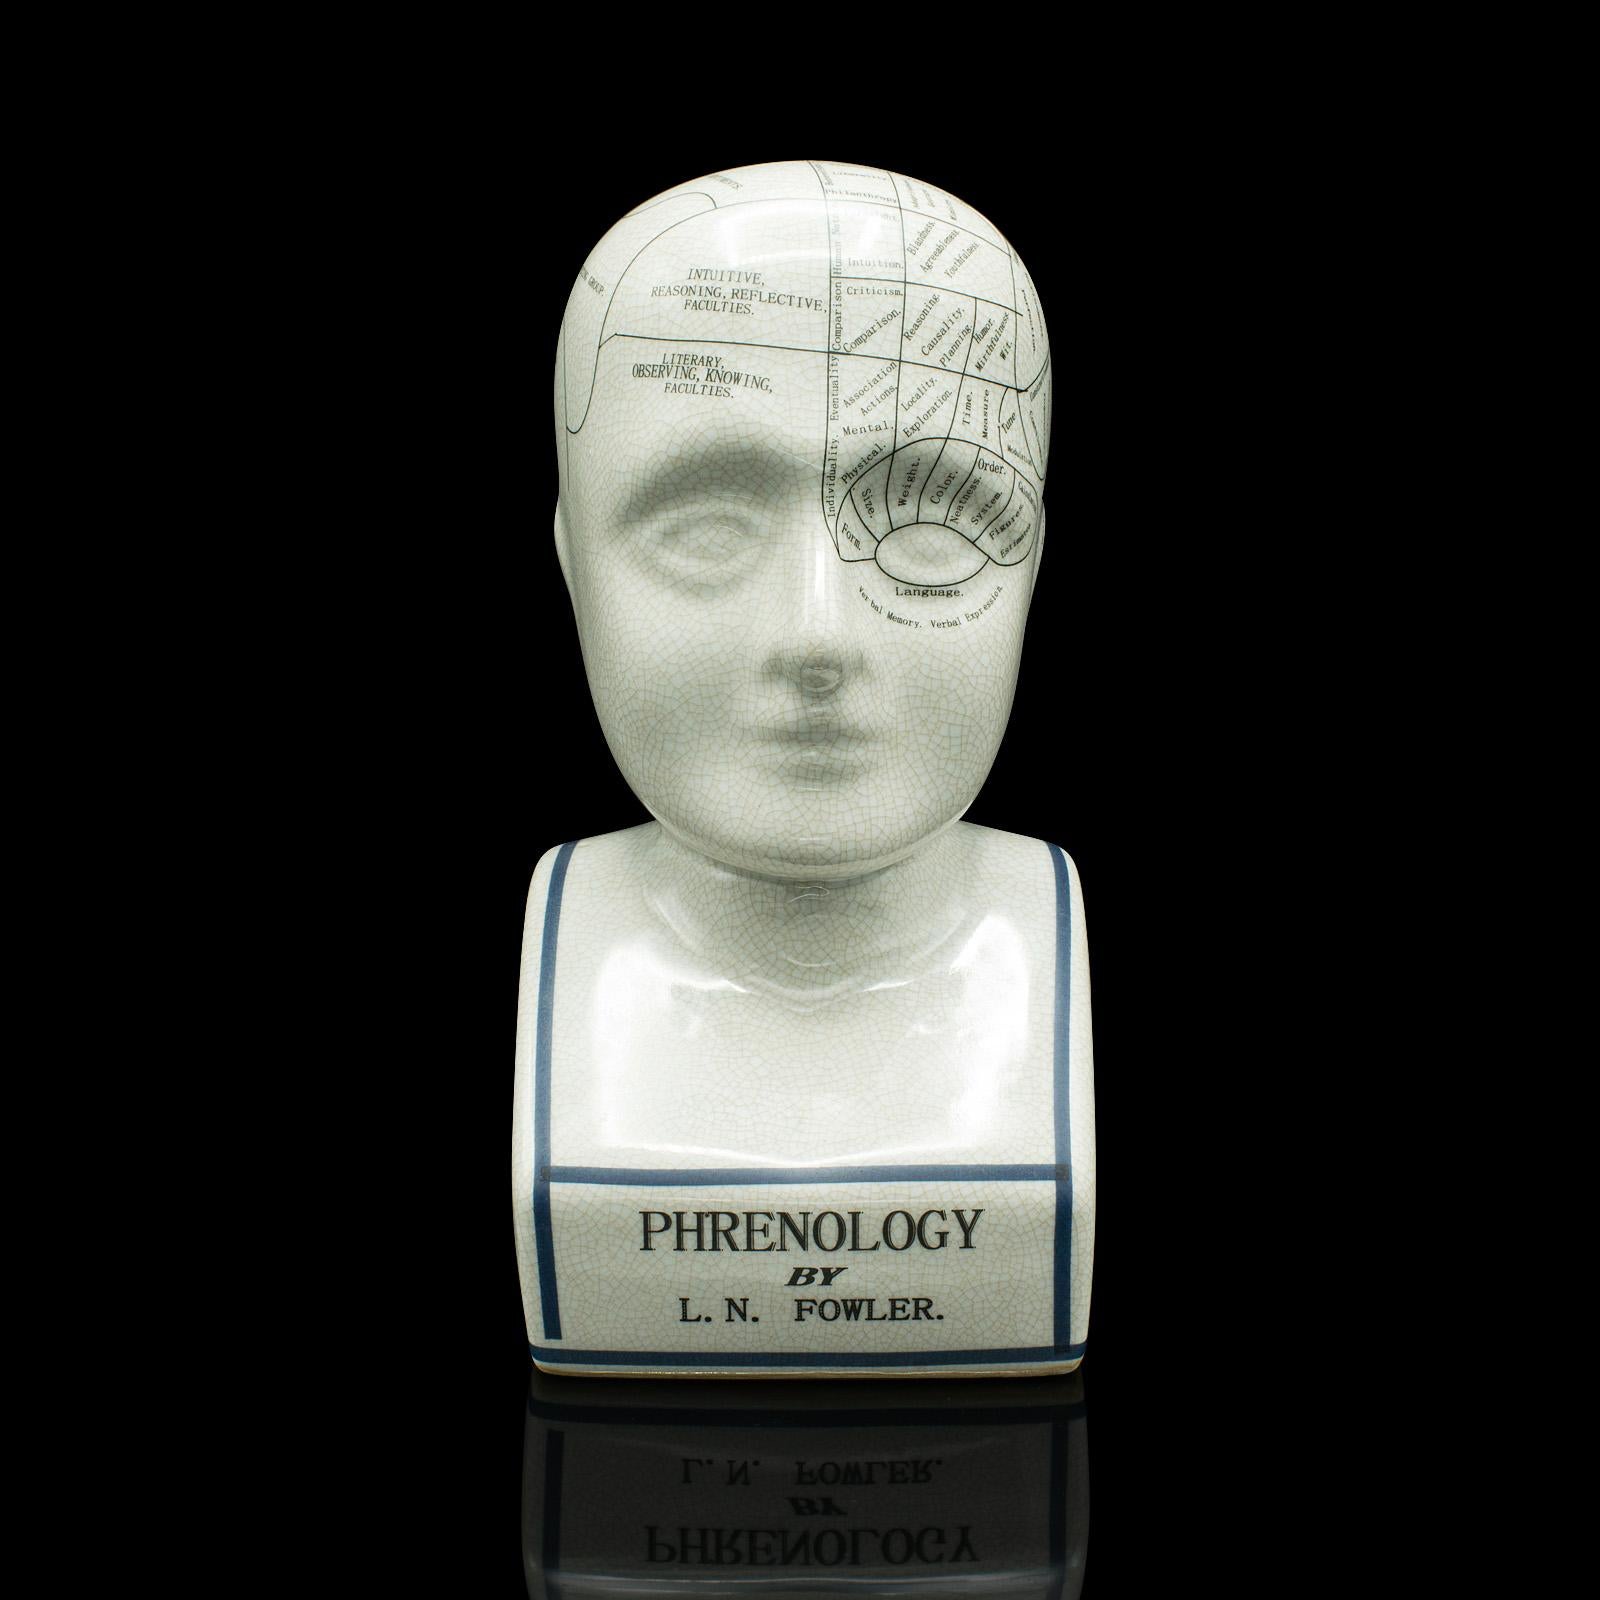 This is a vintage Phrenology head ornament. An English, ceramic decorative bust, dating to the late 20th century, circa 1970.

Appealing decorative example of the 18th century science of Phrenology
Displays a desirable aged patina and in good order